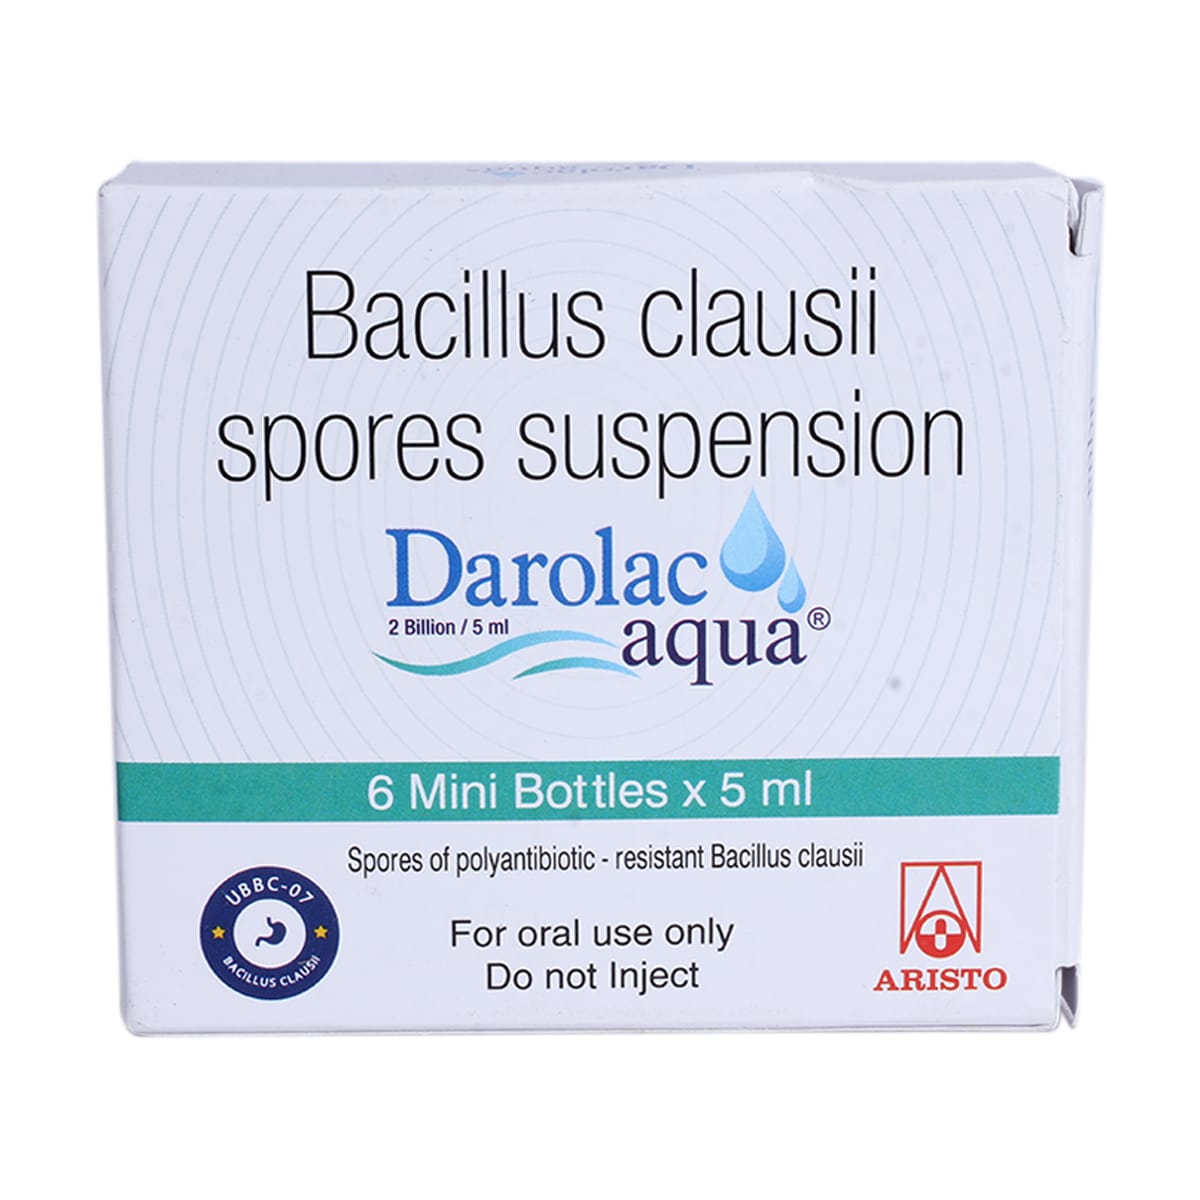 BACILLUS CLAUSII Uses, Side Effects and Medicines Apollo Pharmacy photo